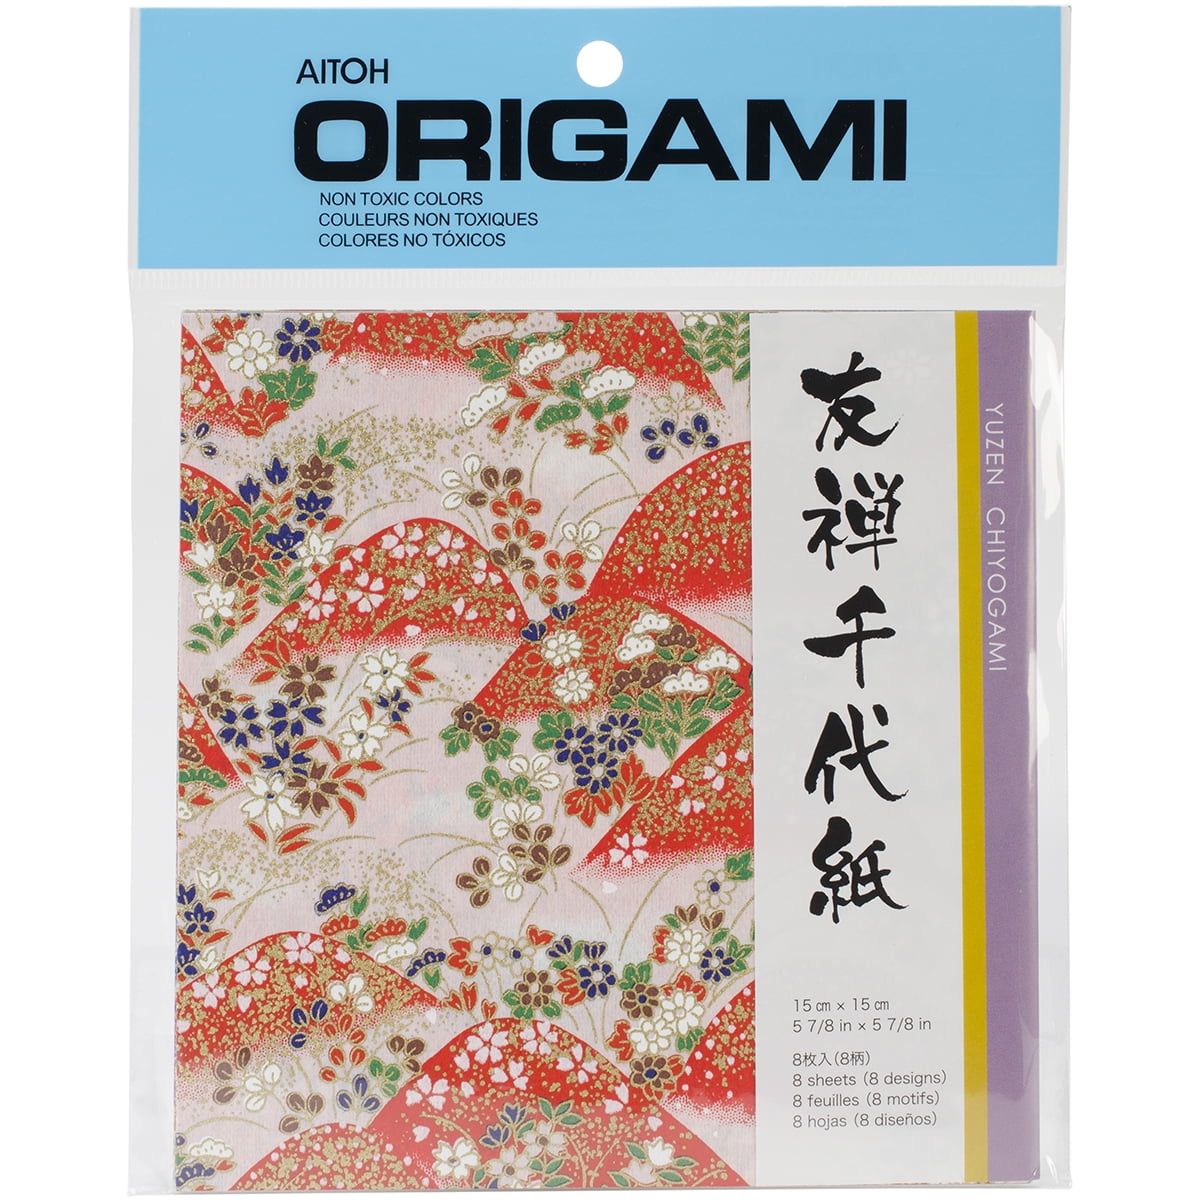 Origami Paper 6X6 20 Sheets-Riggsbee DesignS Robin Joy Aitoh 29252347